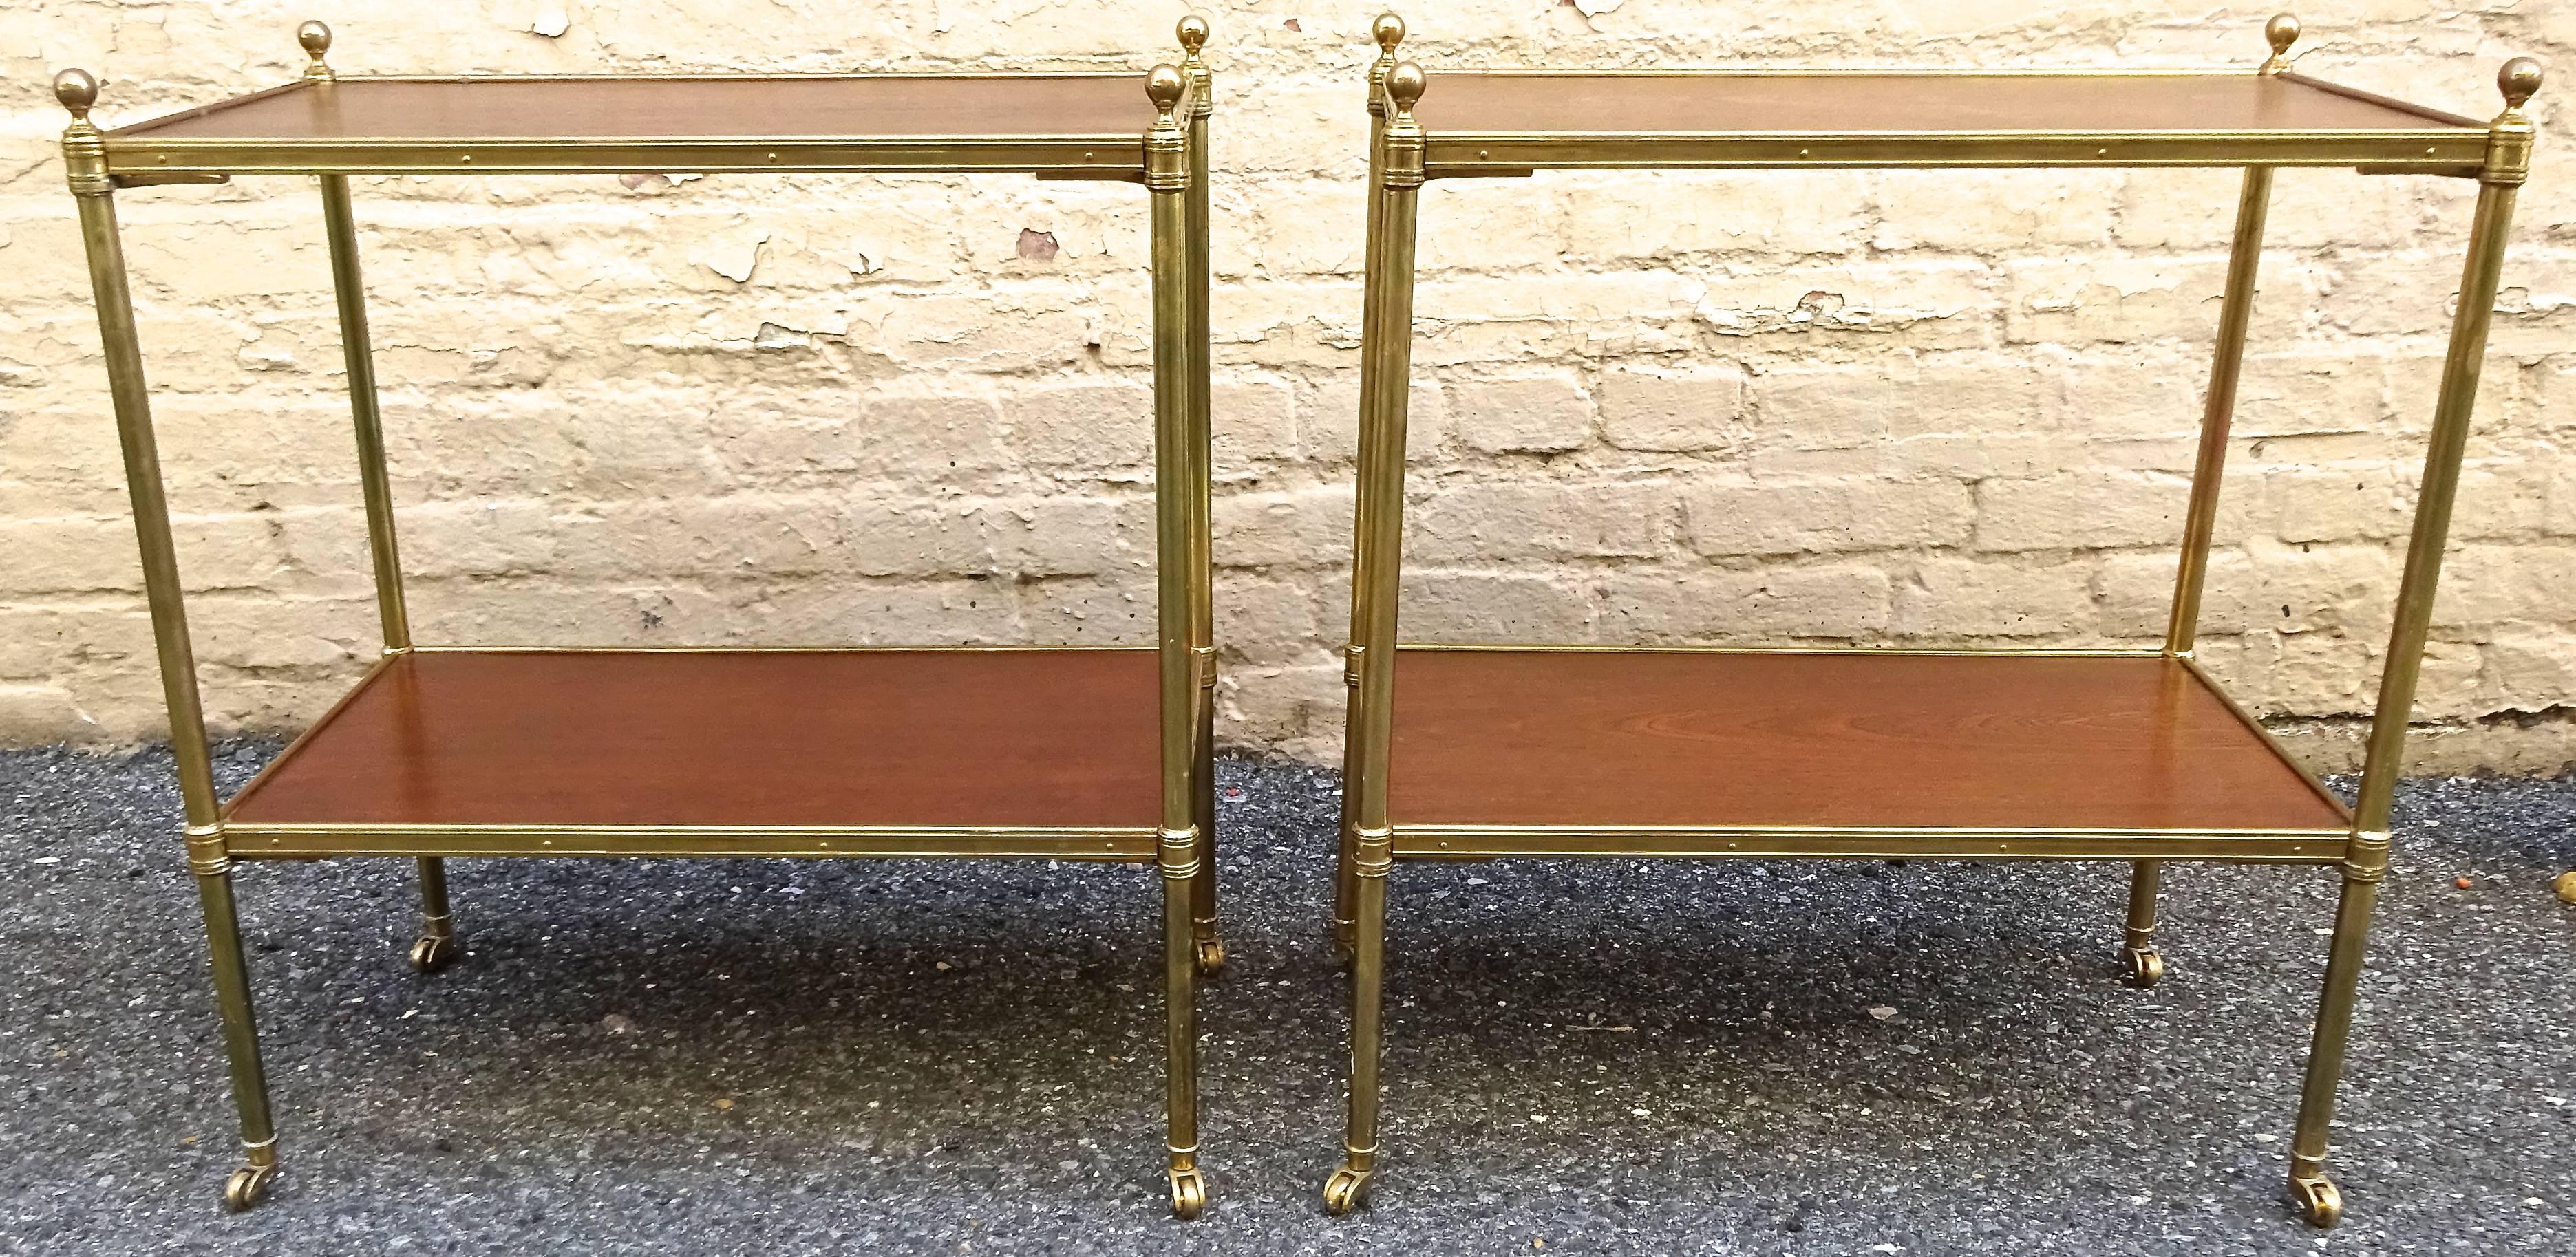 Chic pair of 1960s, Italian Regency style Mahogany and brass side tables.